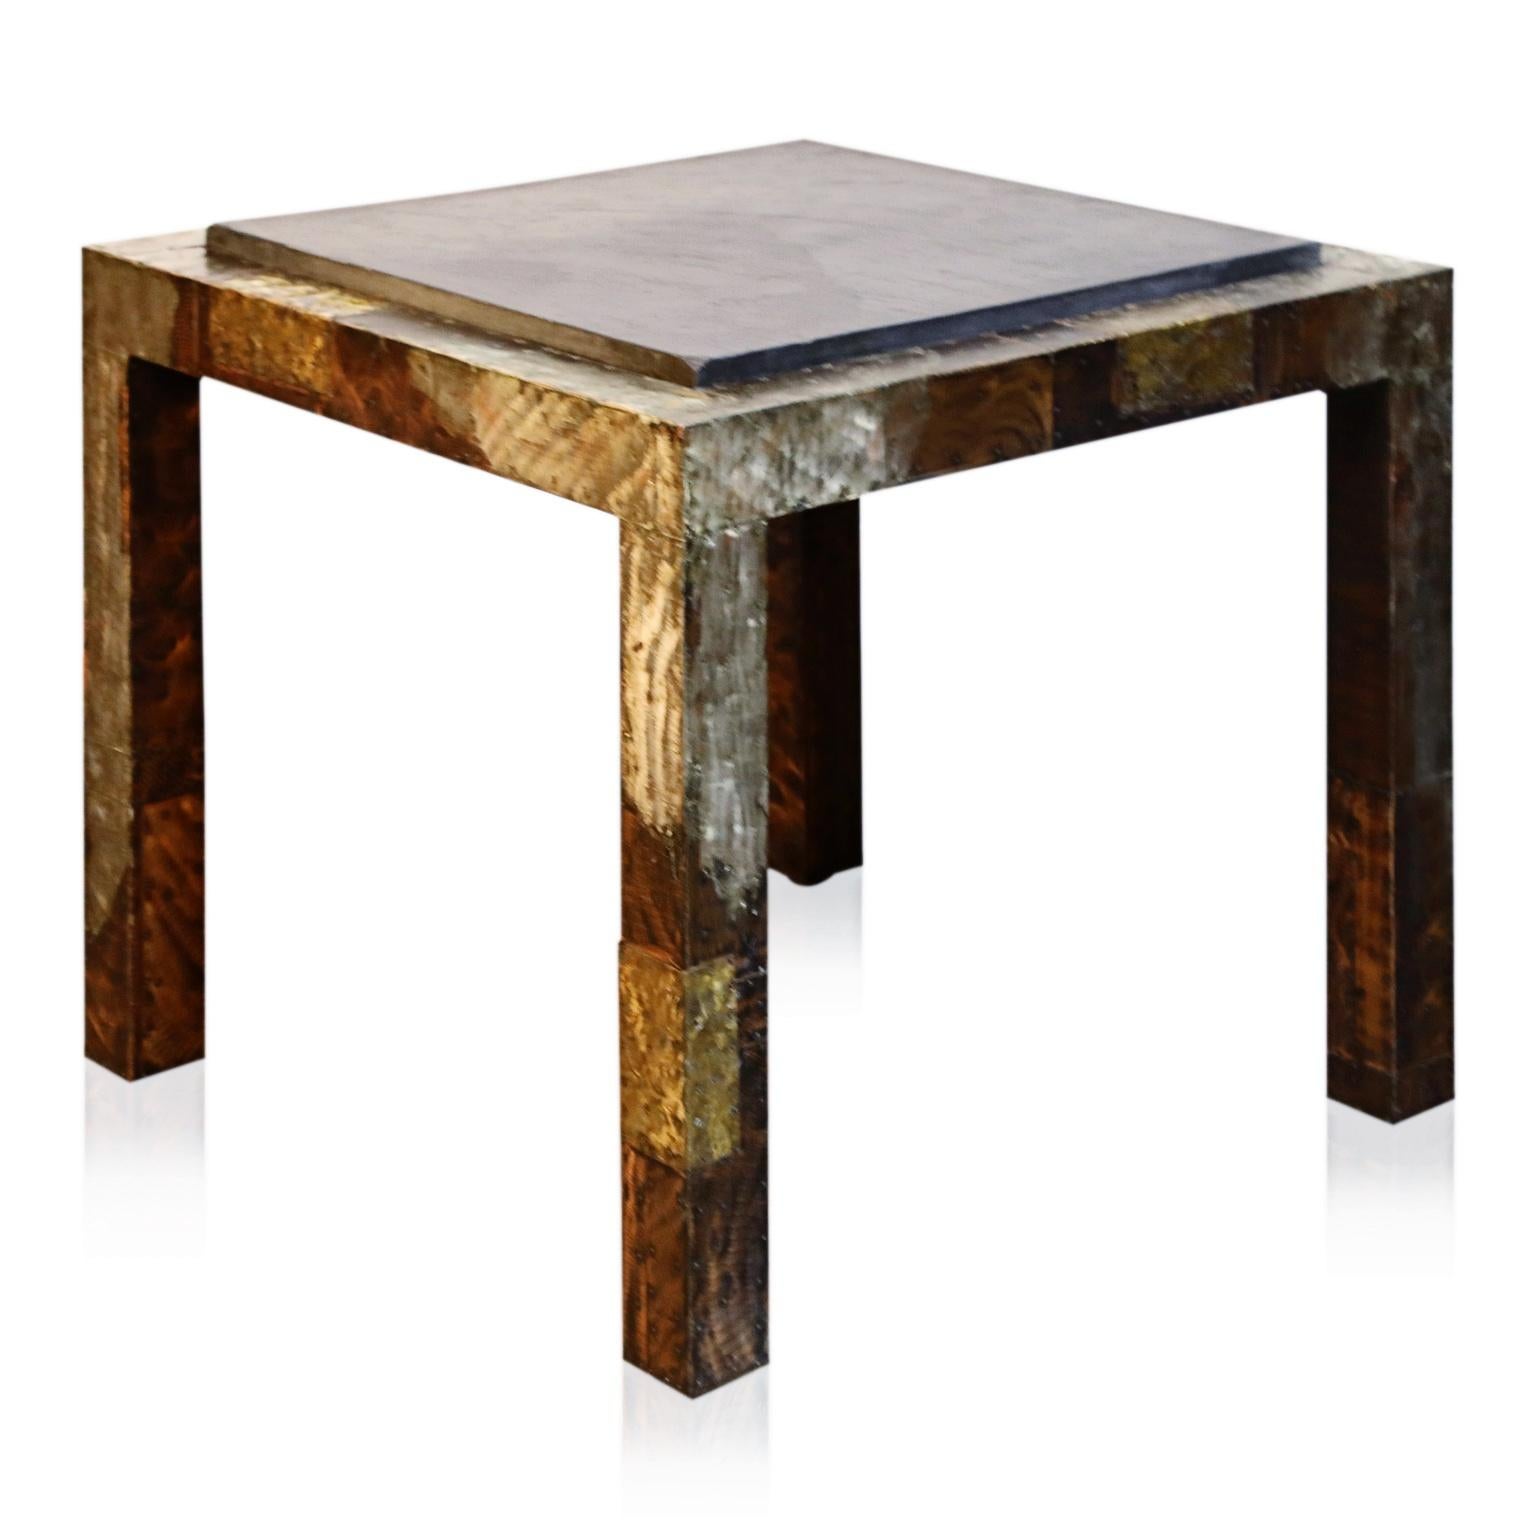 Paul Evans Slate Top Patinated Copper Patchwork Cafe Breakfast Table, 1970s For Sale 6